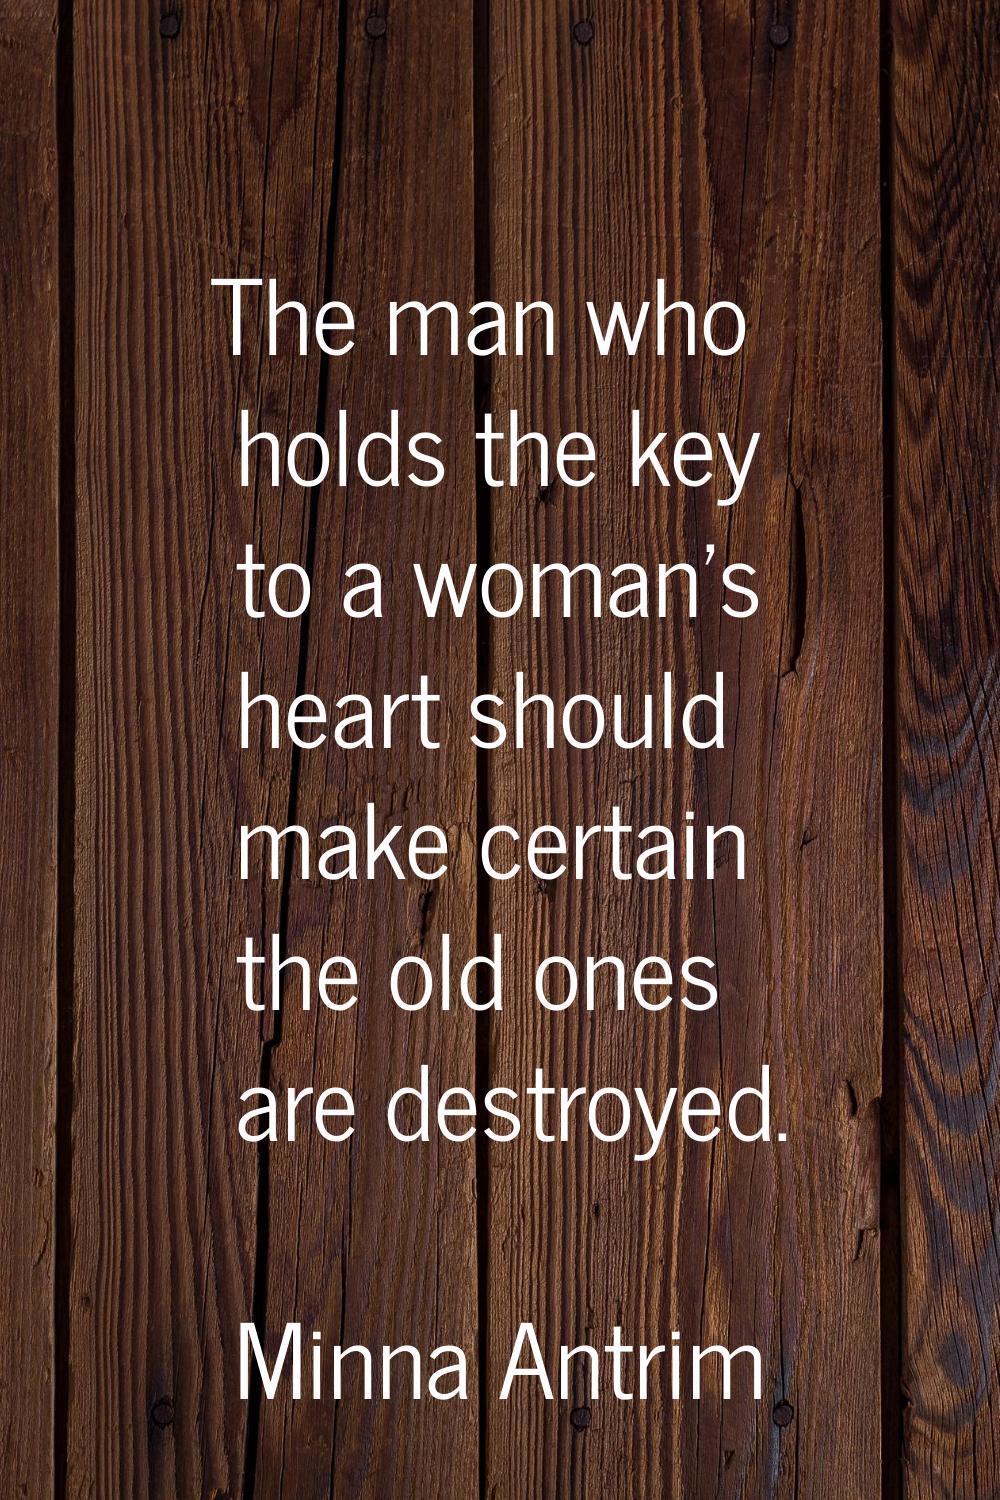 The man who holds the key to a woman's heart should make certain the old ones are destroyed.